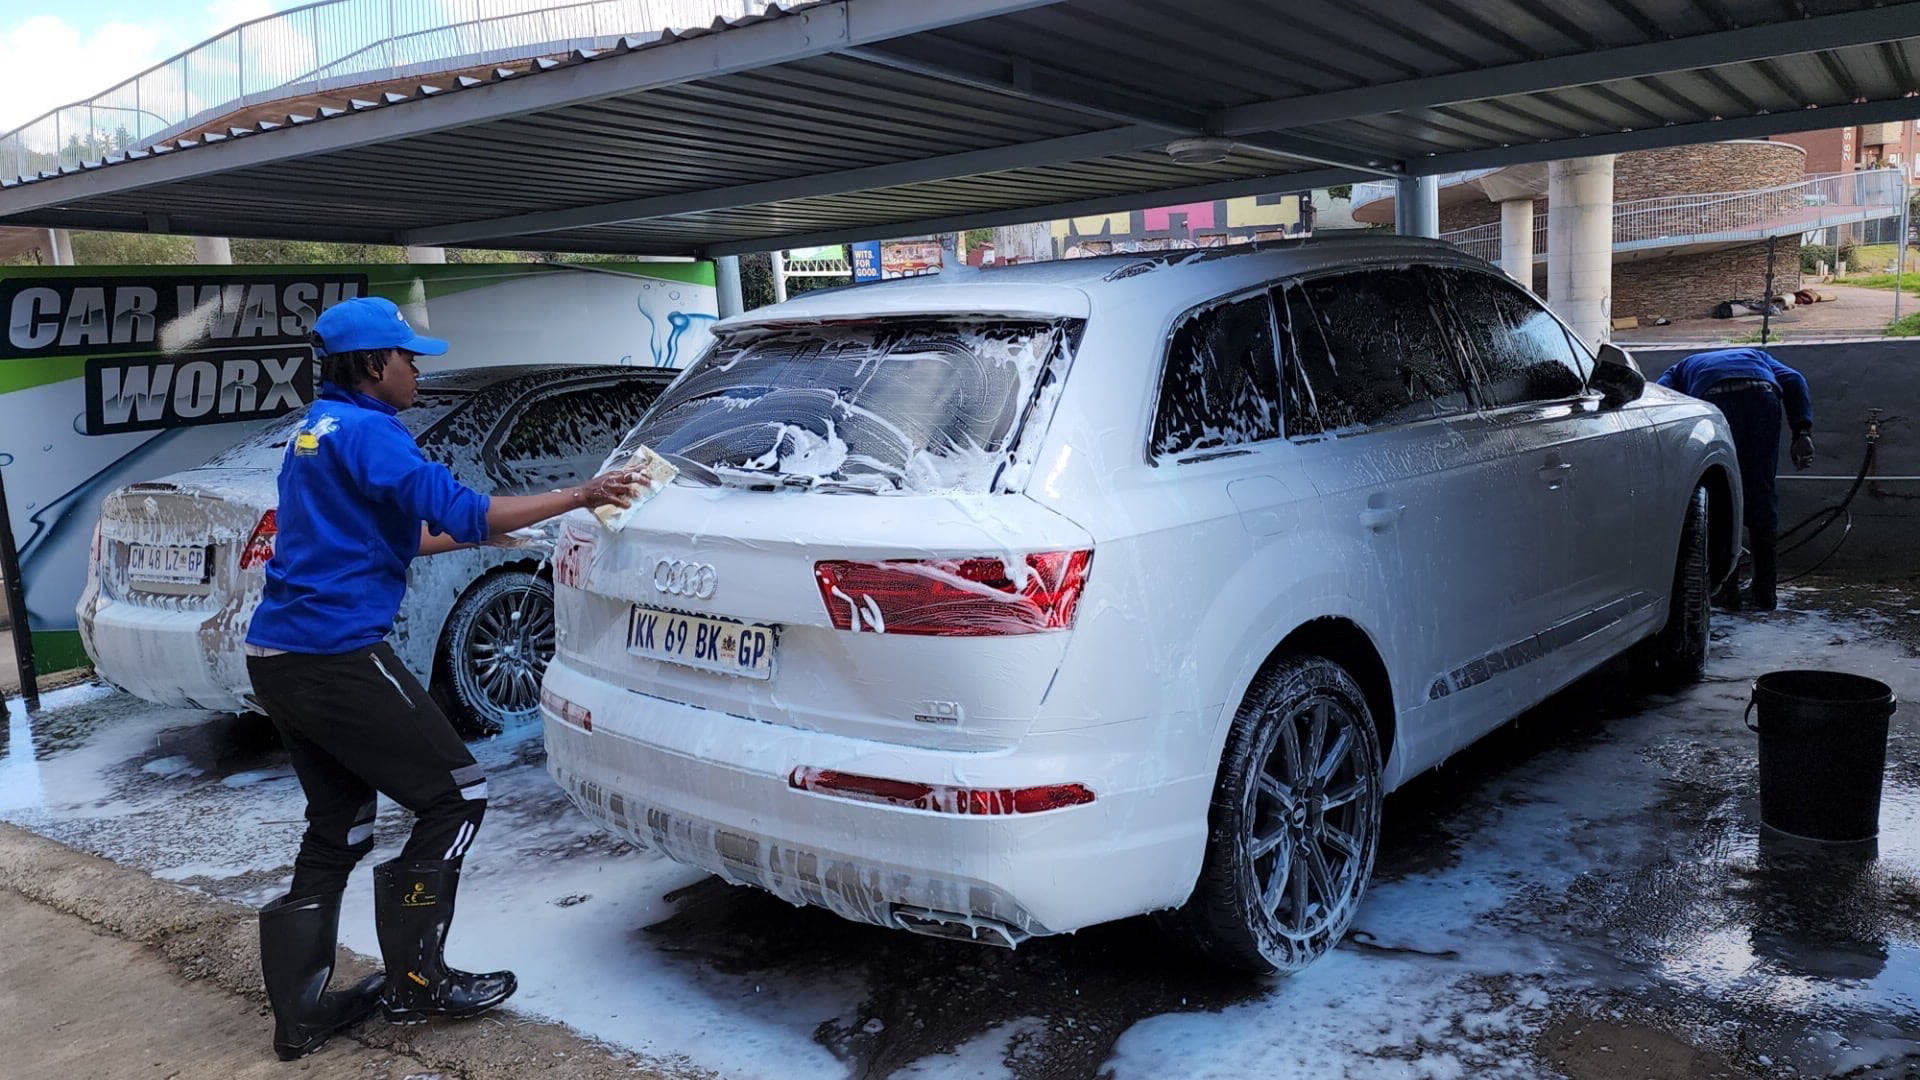 CarWash Worx Milpark Mews Branch, Car Wash Franchises Available, CarWash Worx Head Office, Join The Leading Car Wash Franchising Group, Start Your Own Successful Car Wash Business Now